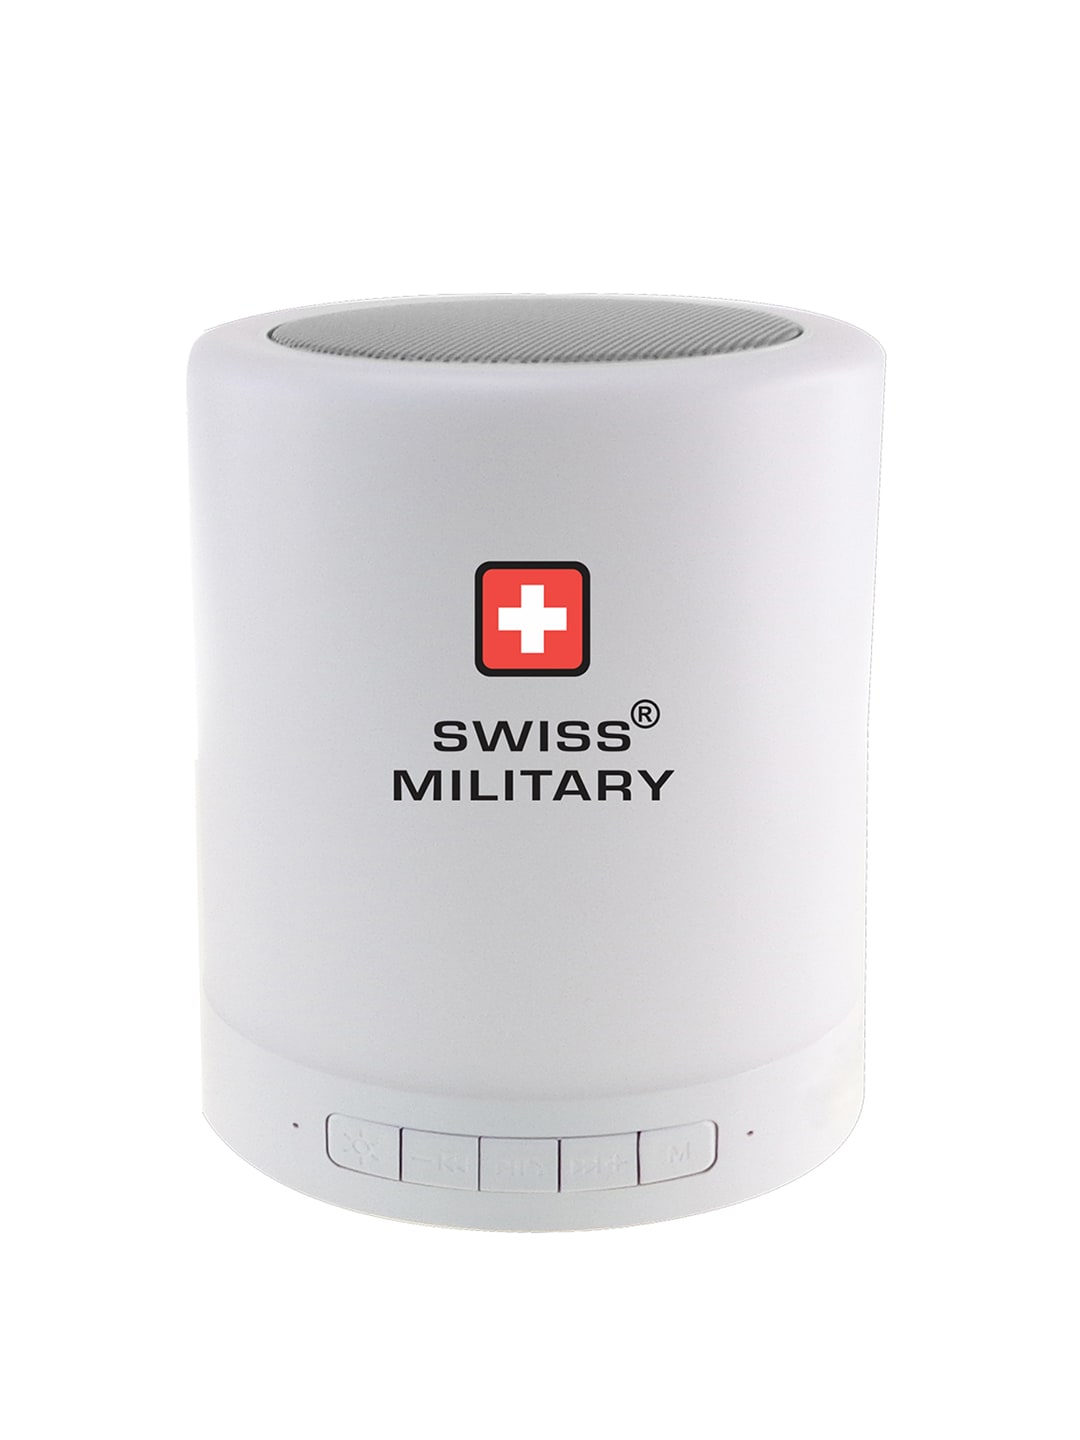 SWISS MILITARY 6-in-1 Smart Torch Lamp Bluetooth Speakers Price in India